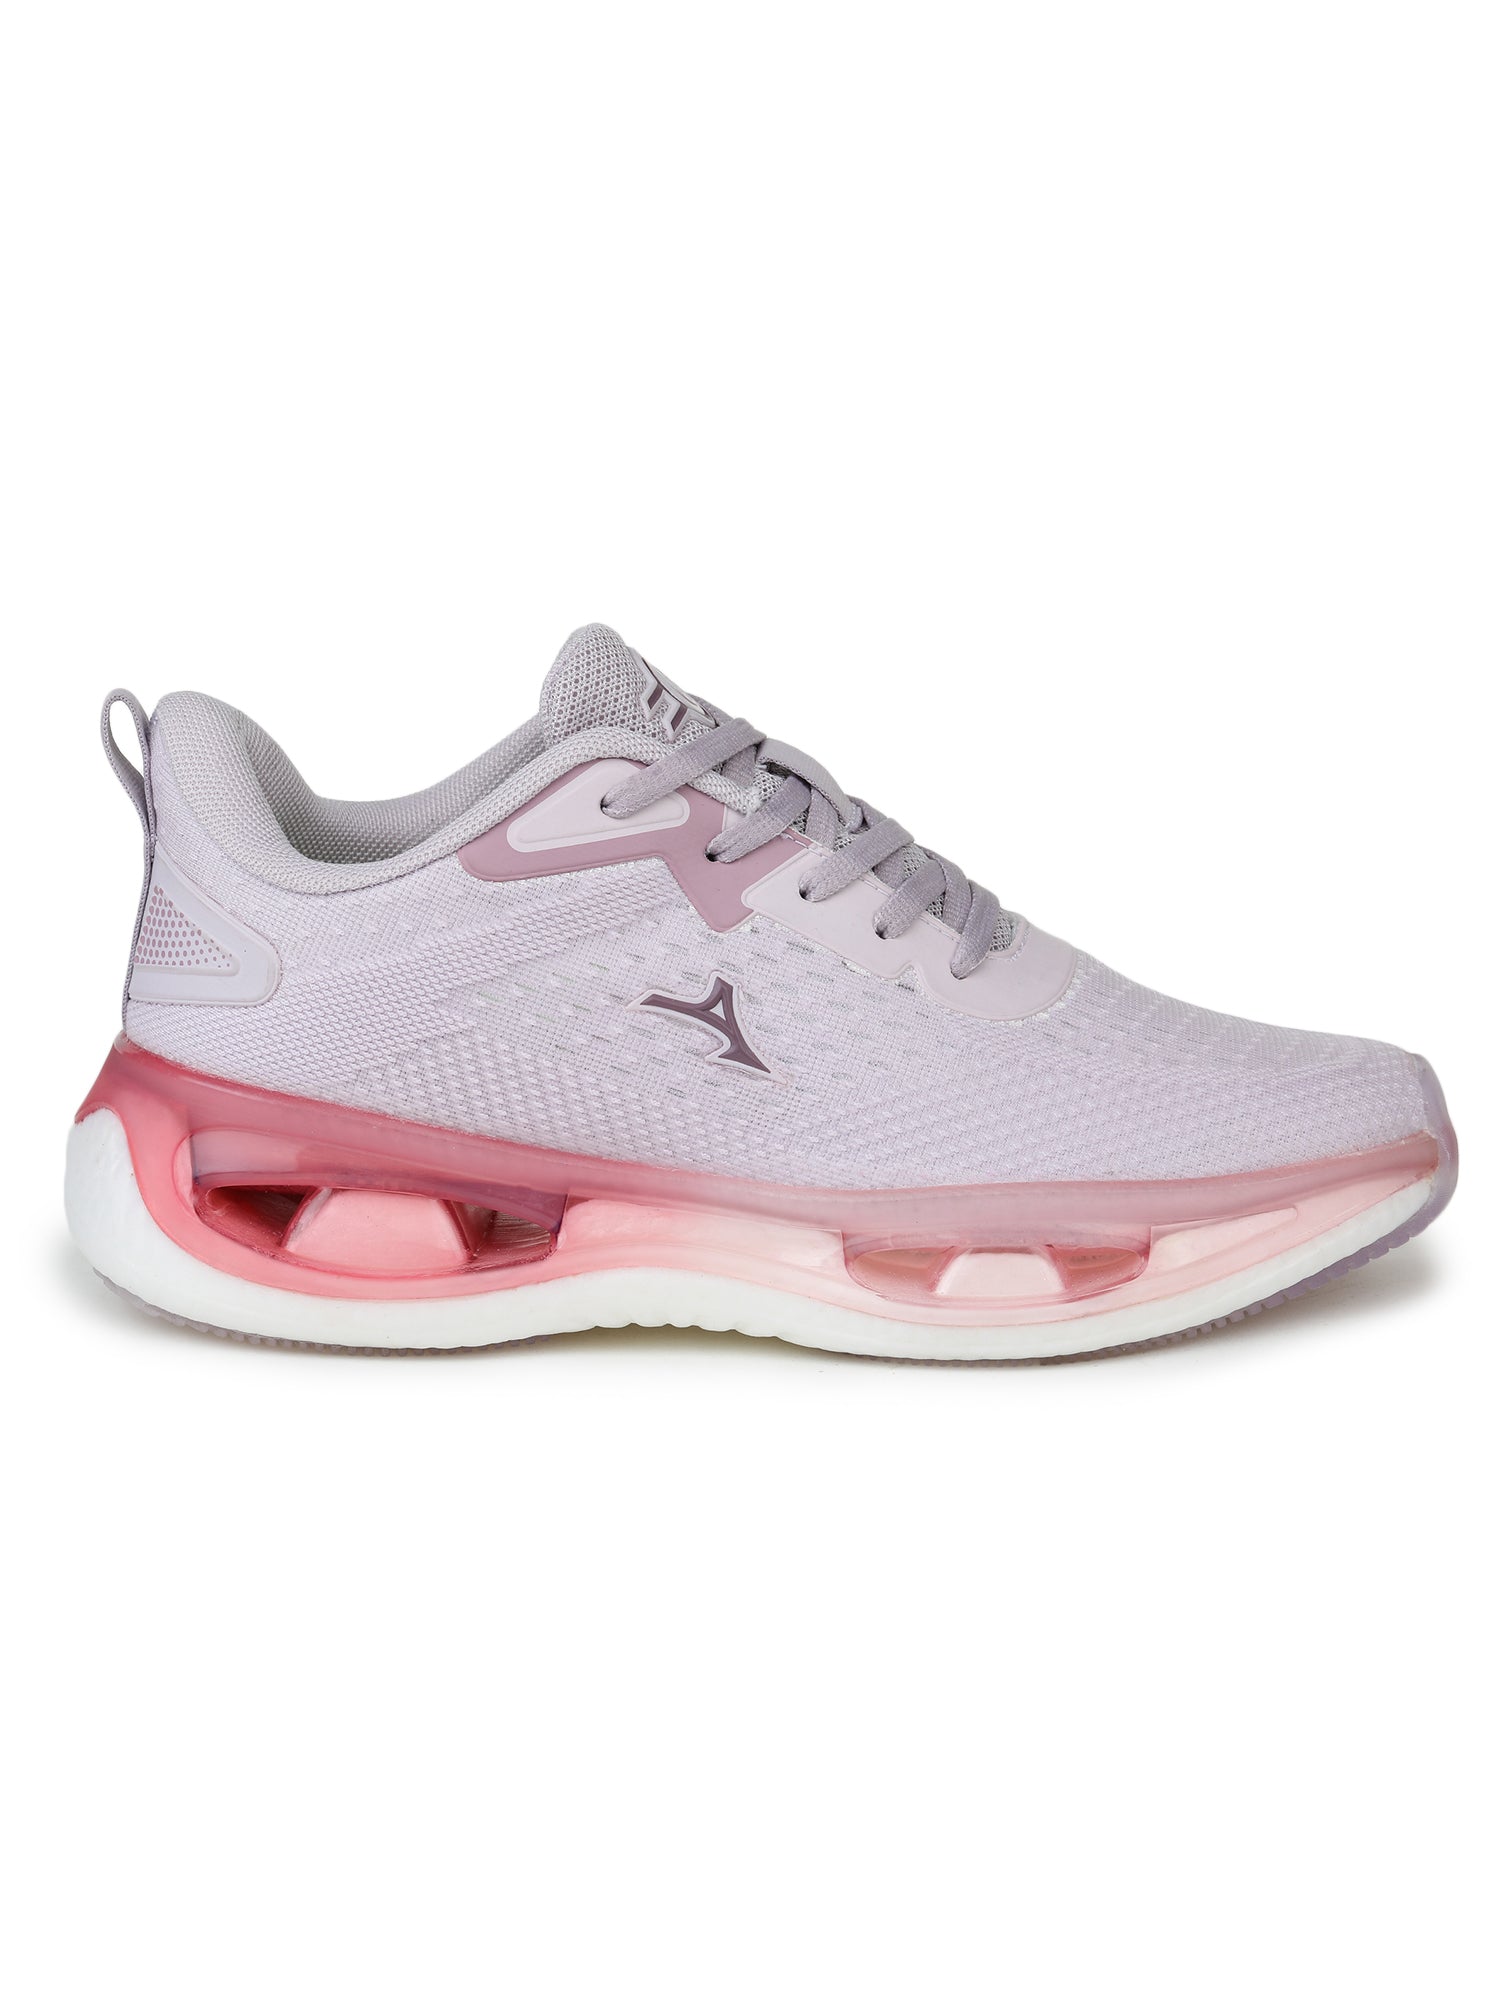 ABROS VERNA SPORTS SHOES FOR WOMEN